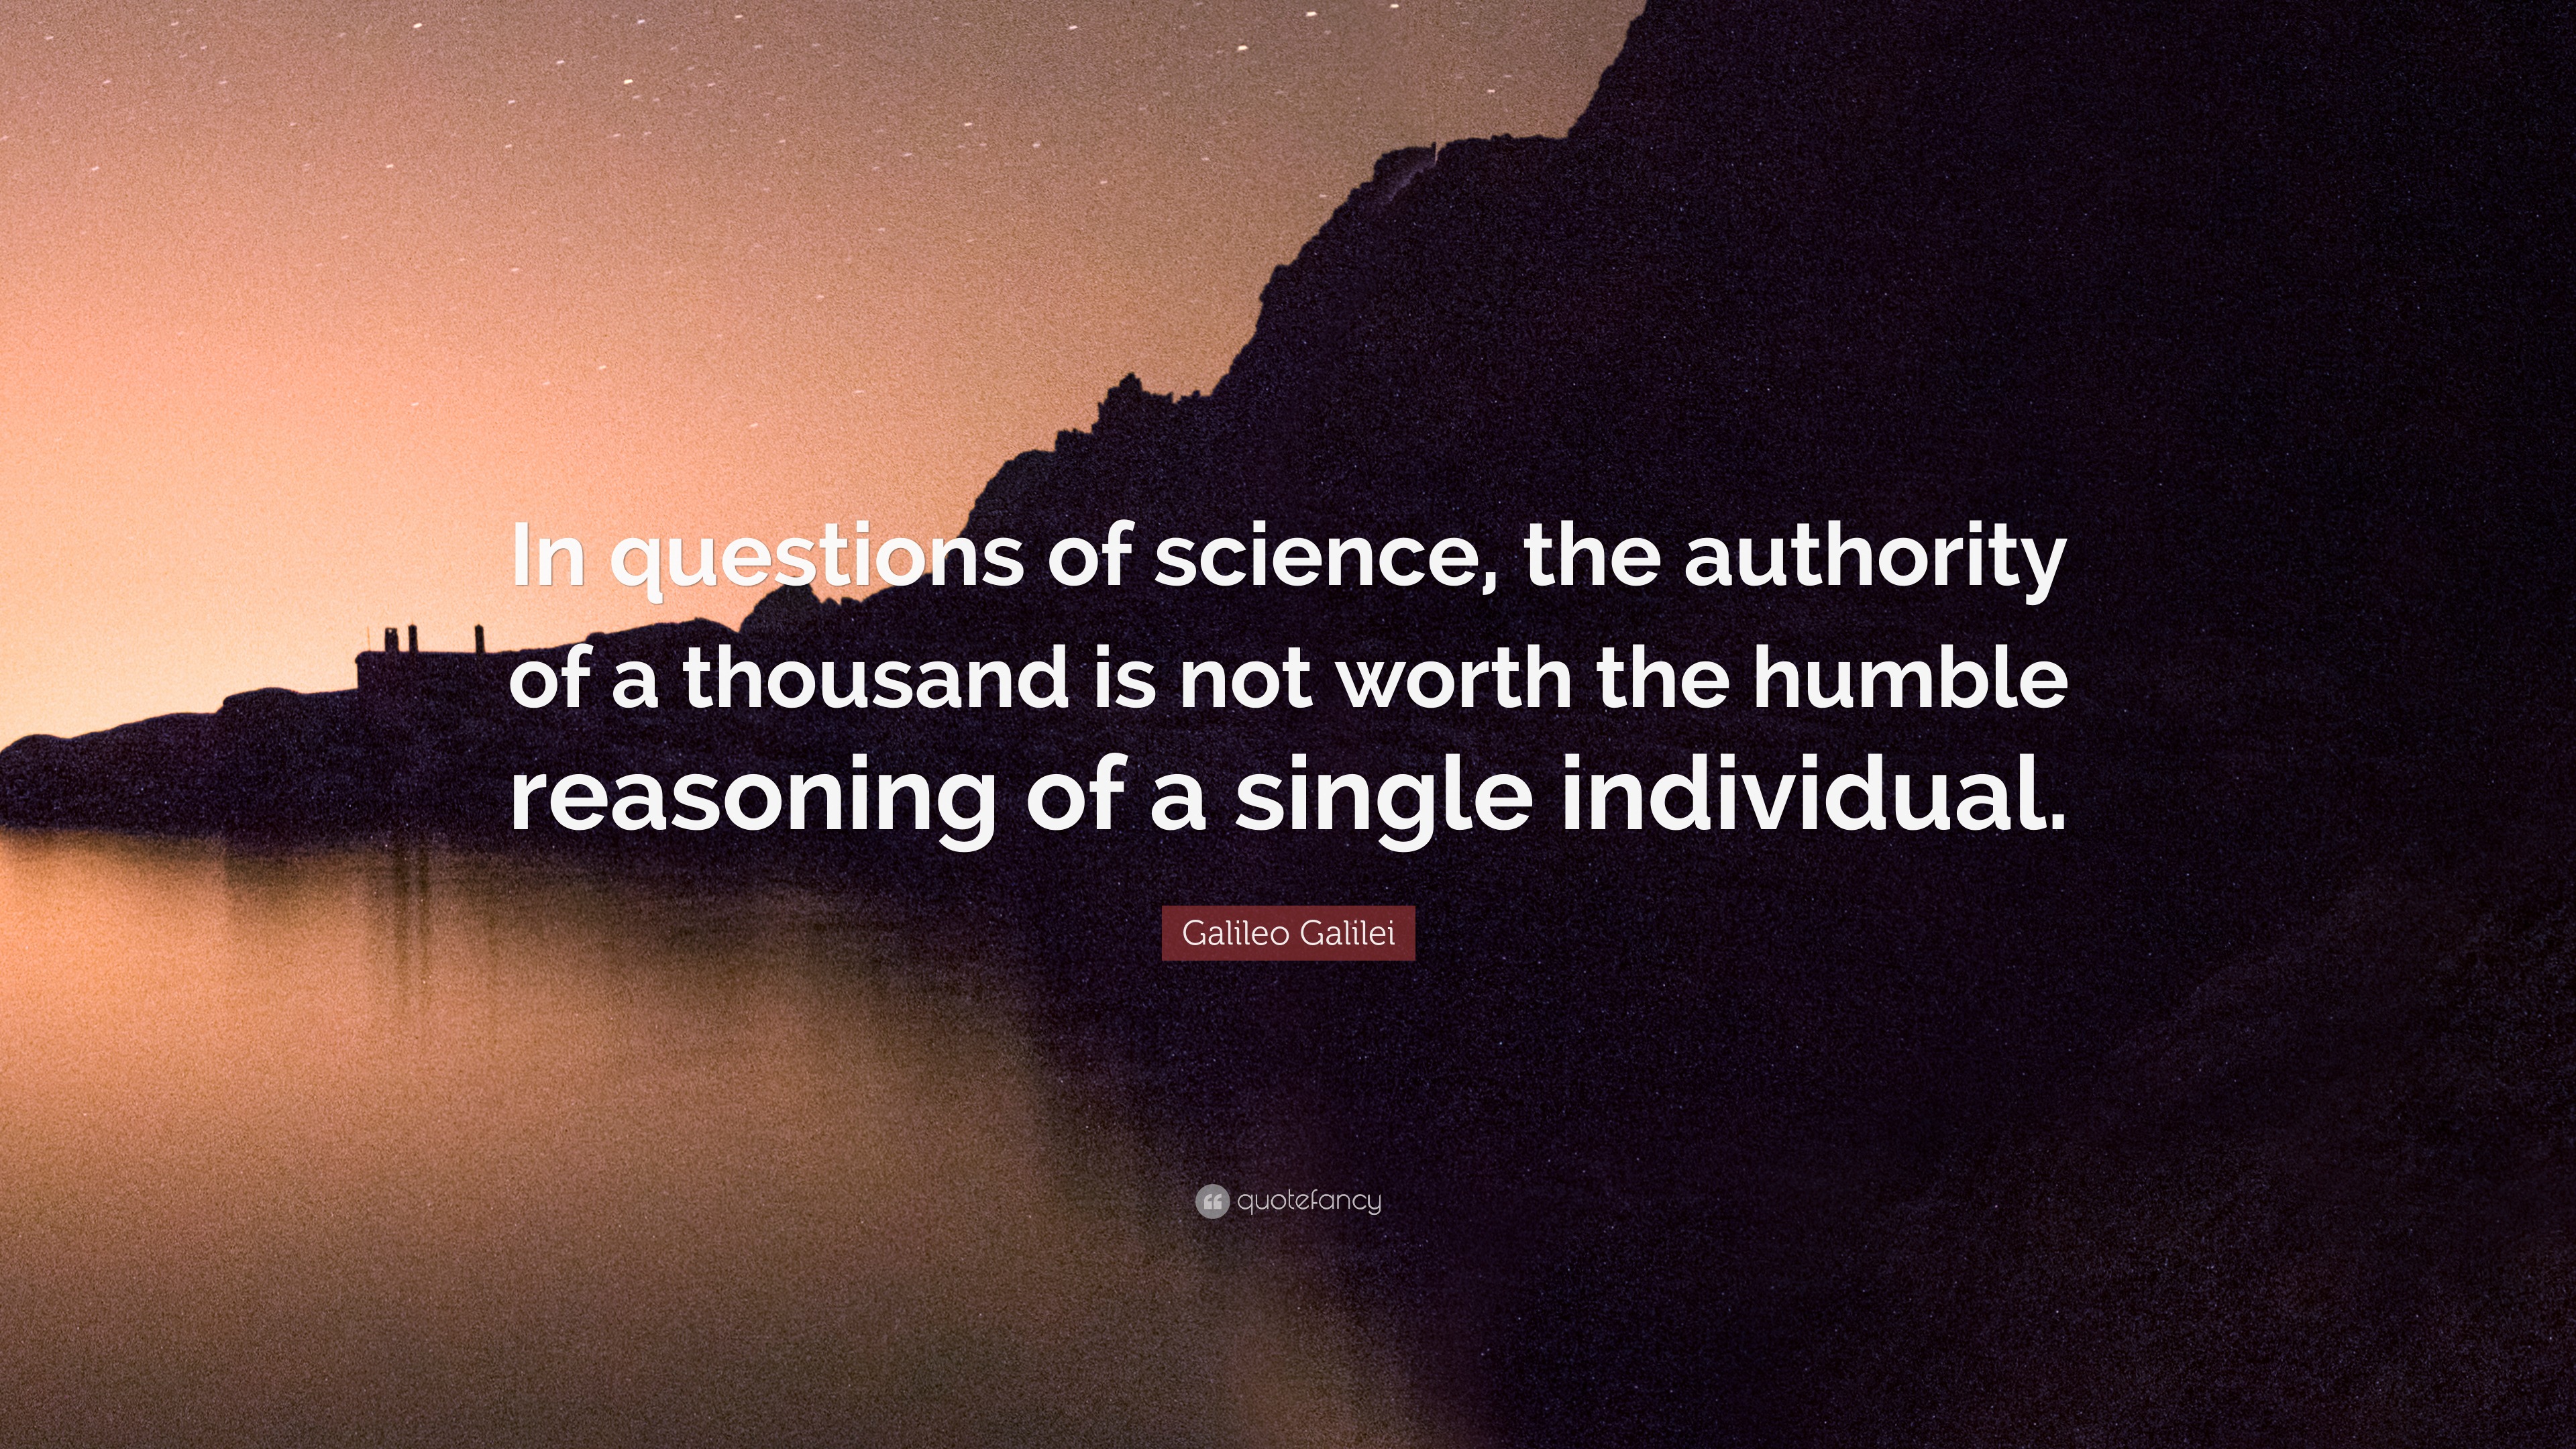 Galileo Galilei Quote: “In questions of science, the authority of a ...